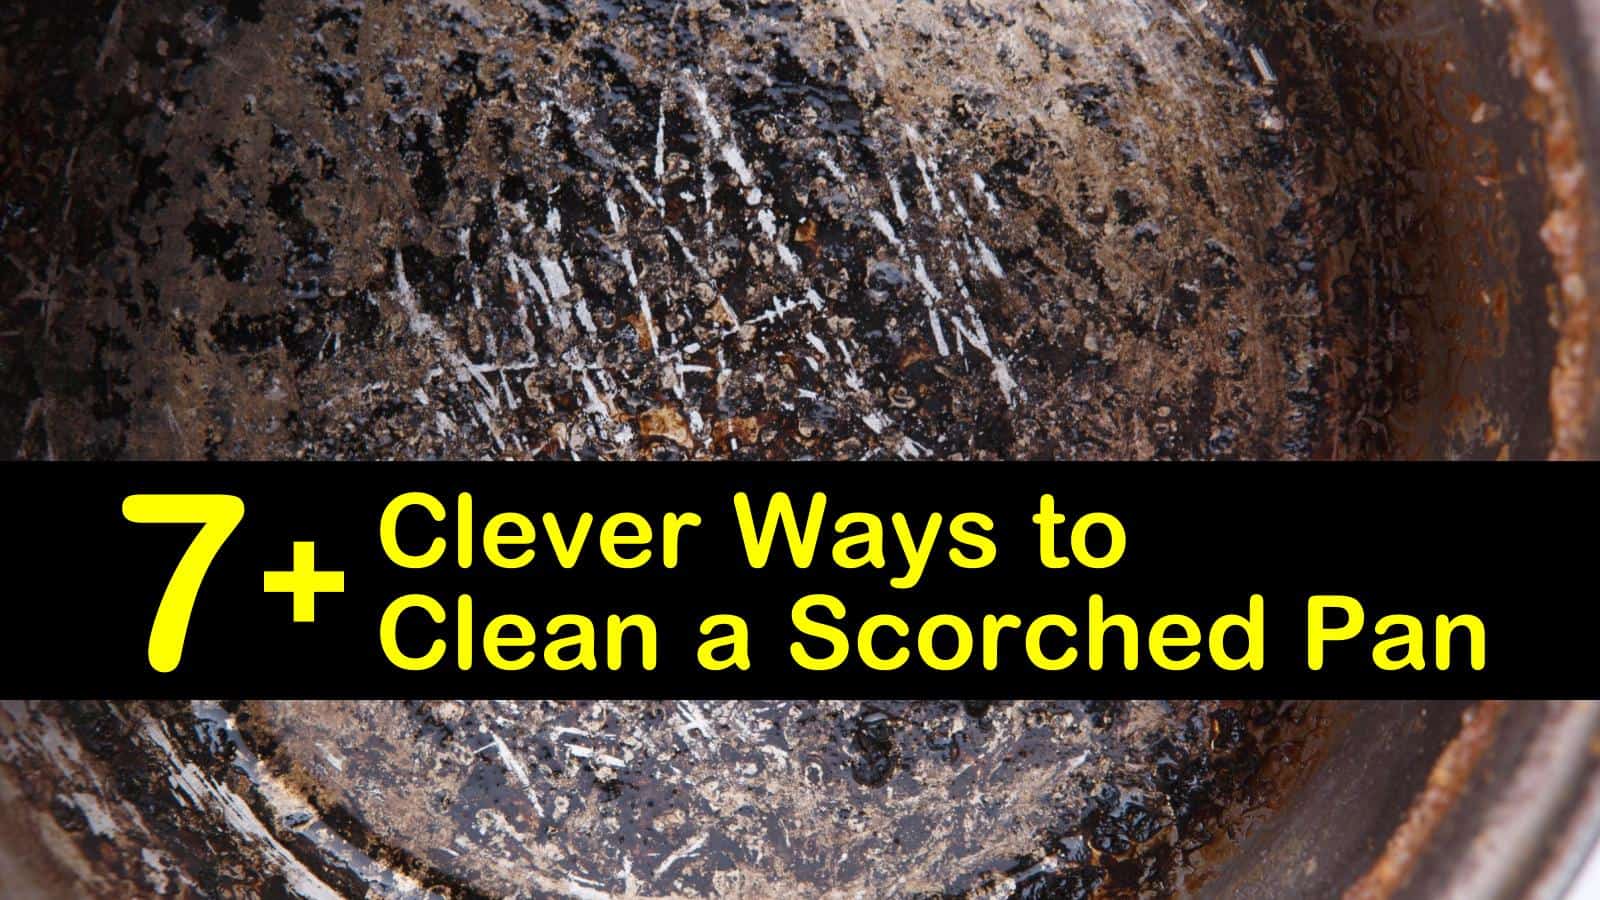 how to clean a scorched pan titleimg1